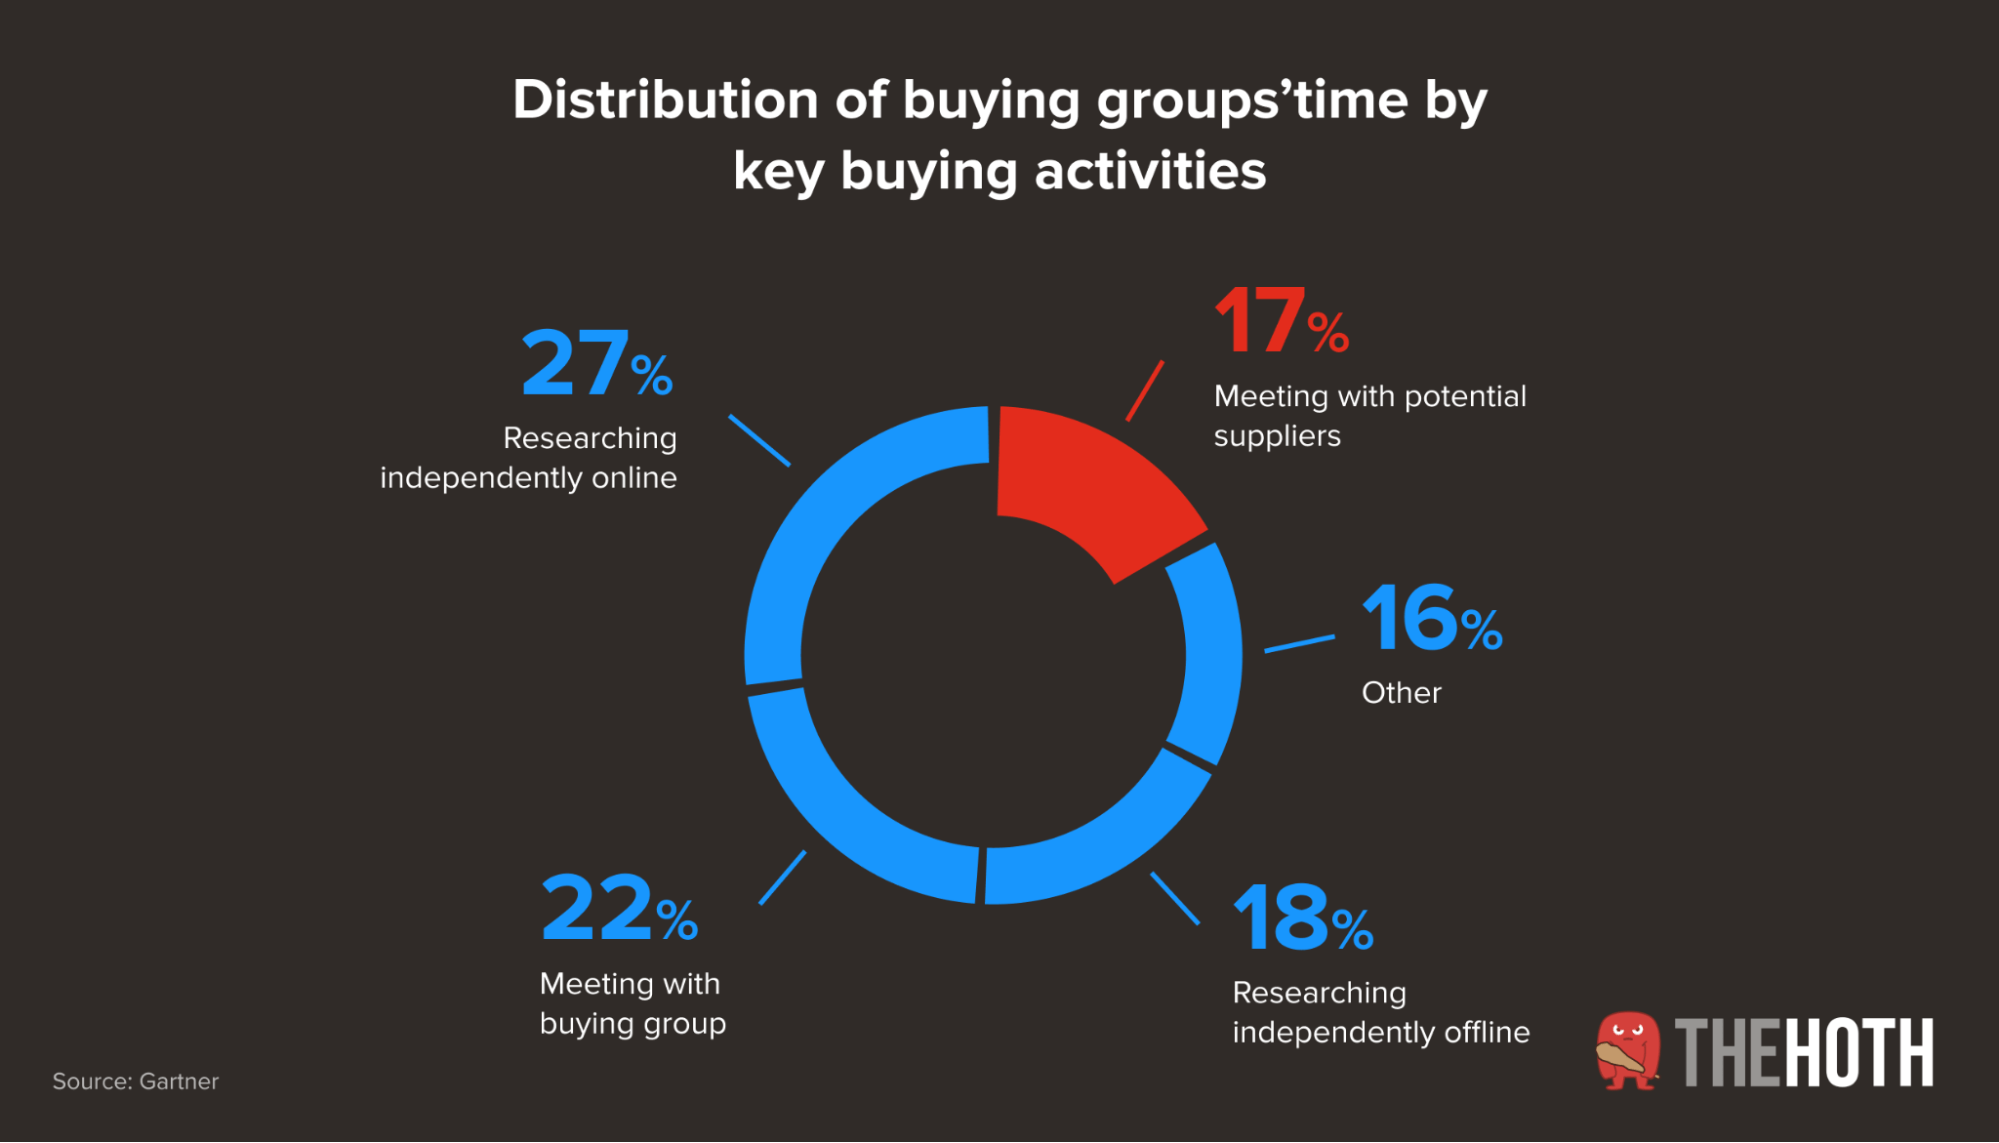 How B2B buying groups spend their time